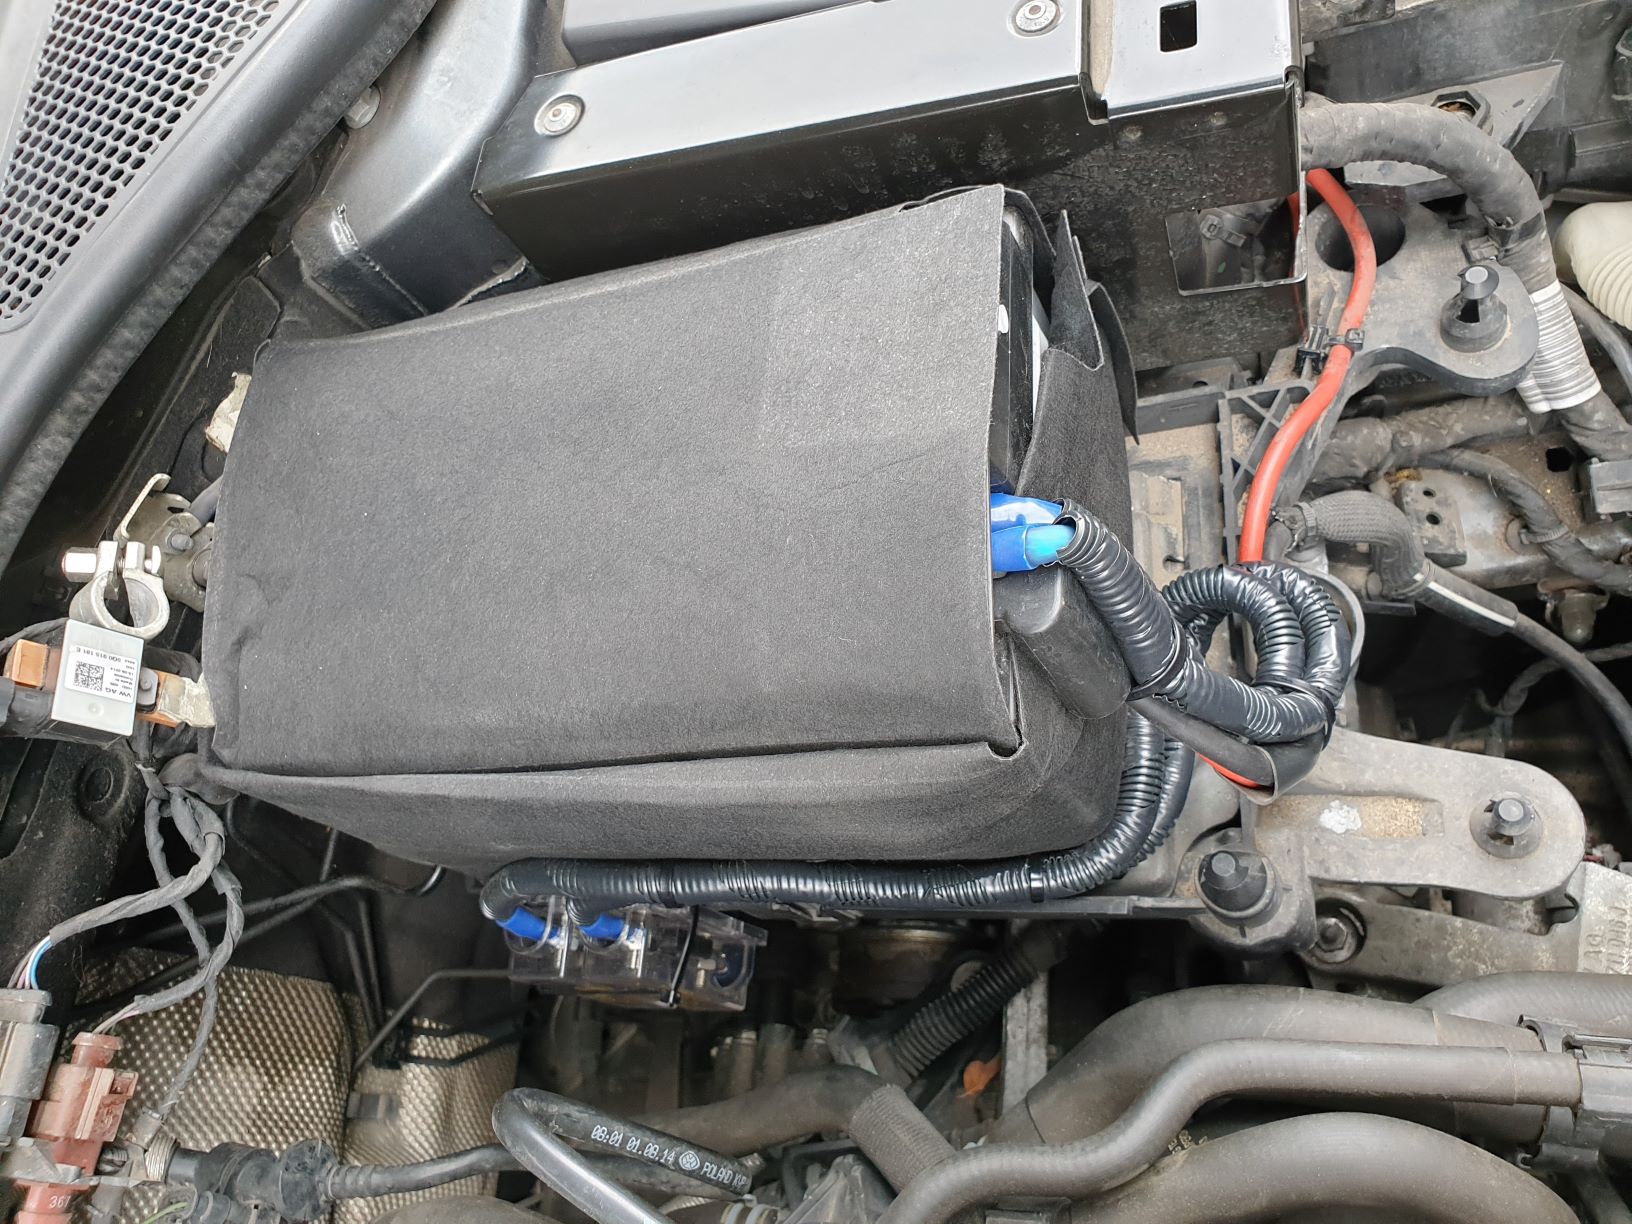 Fuse holder and power in engine bay